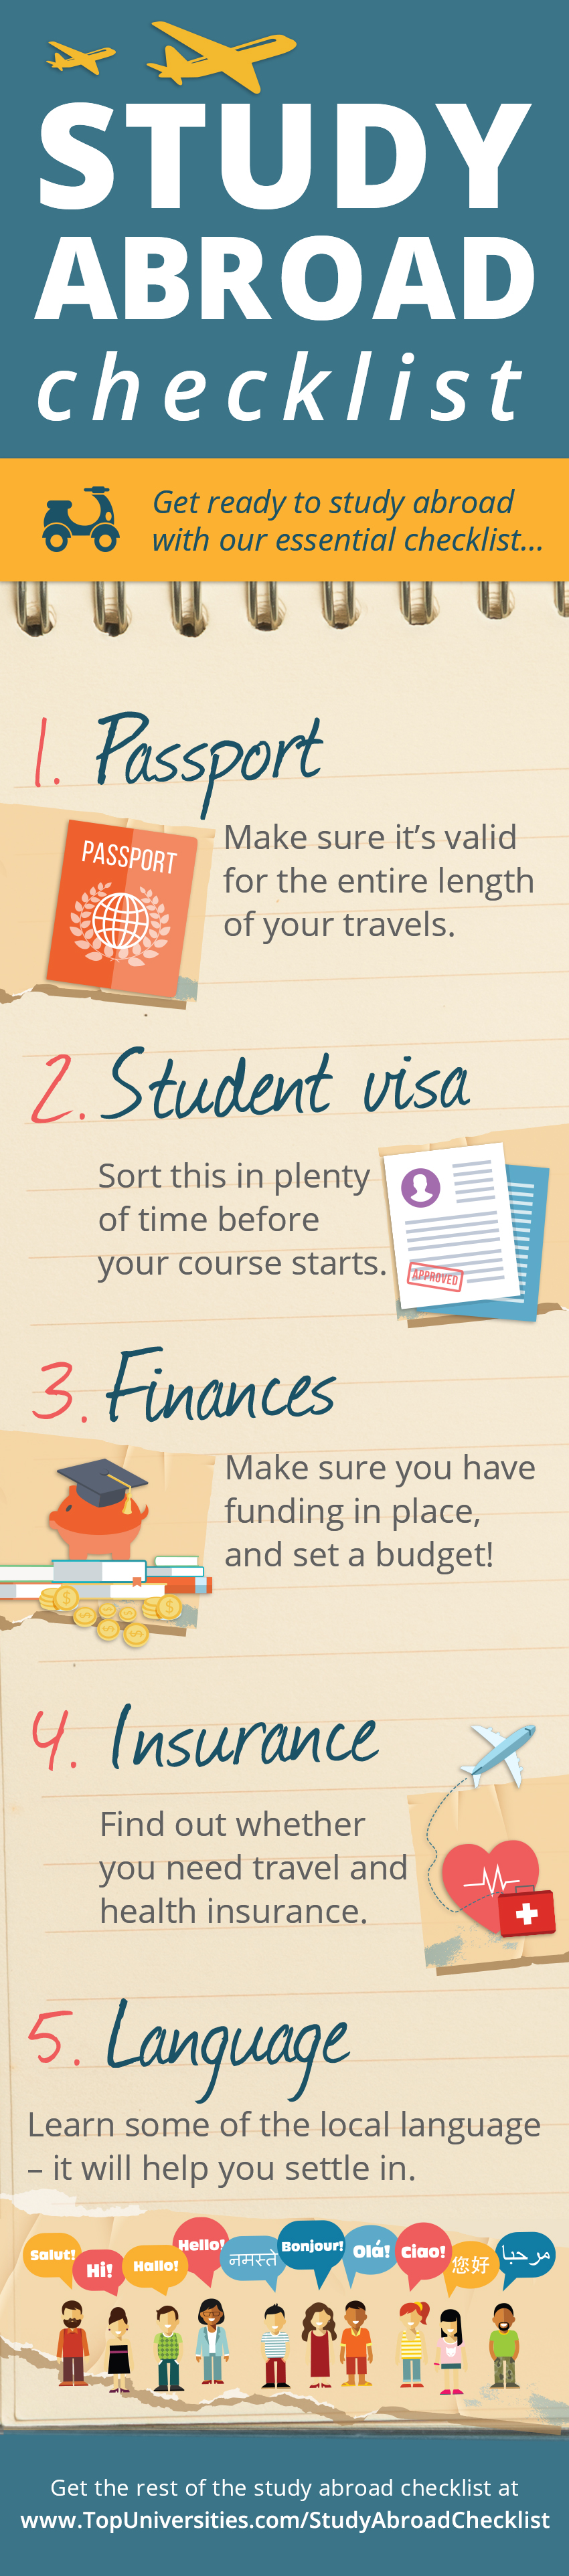 study_abroad_checklist_infographic